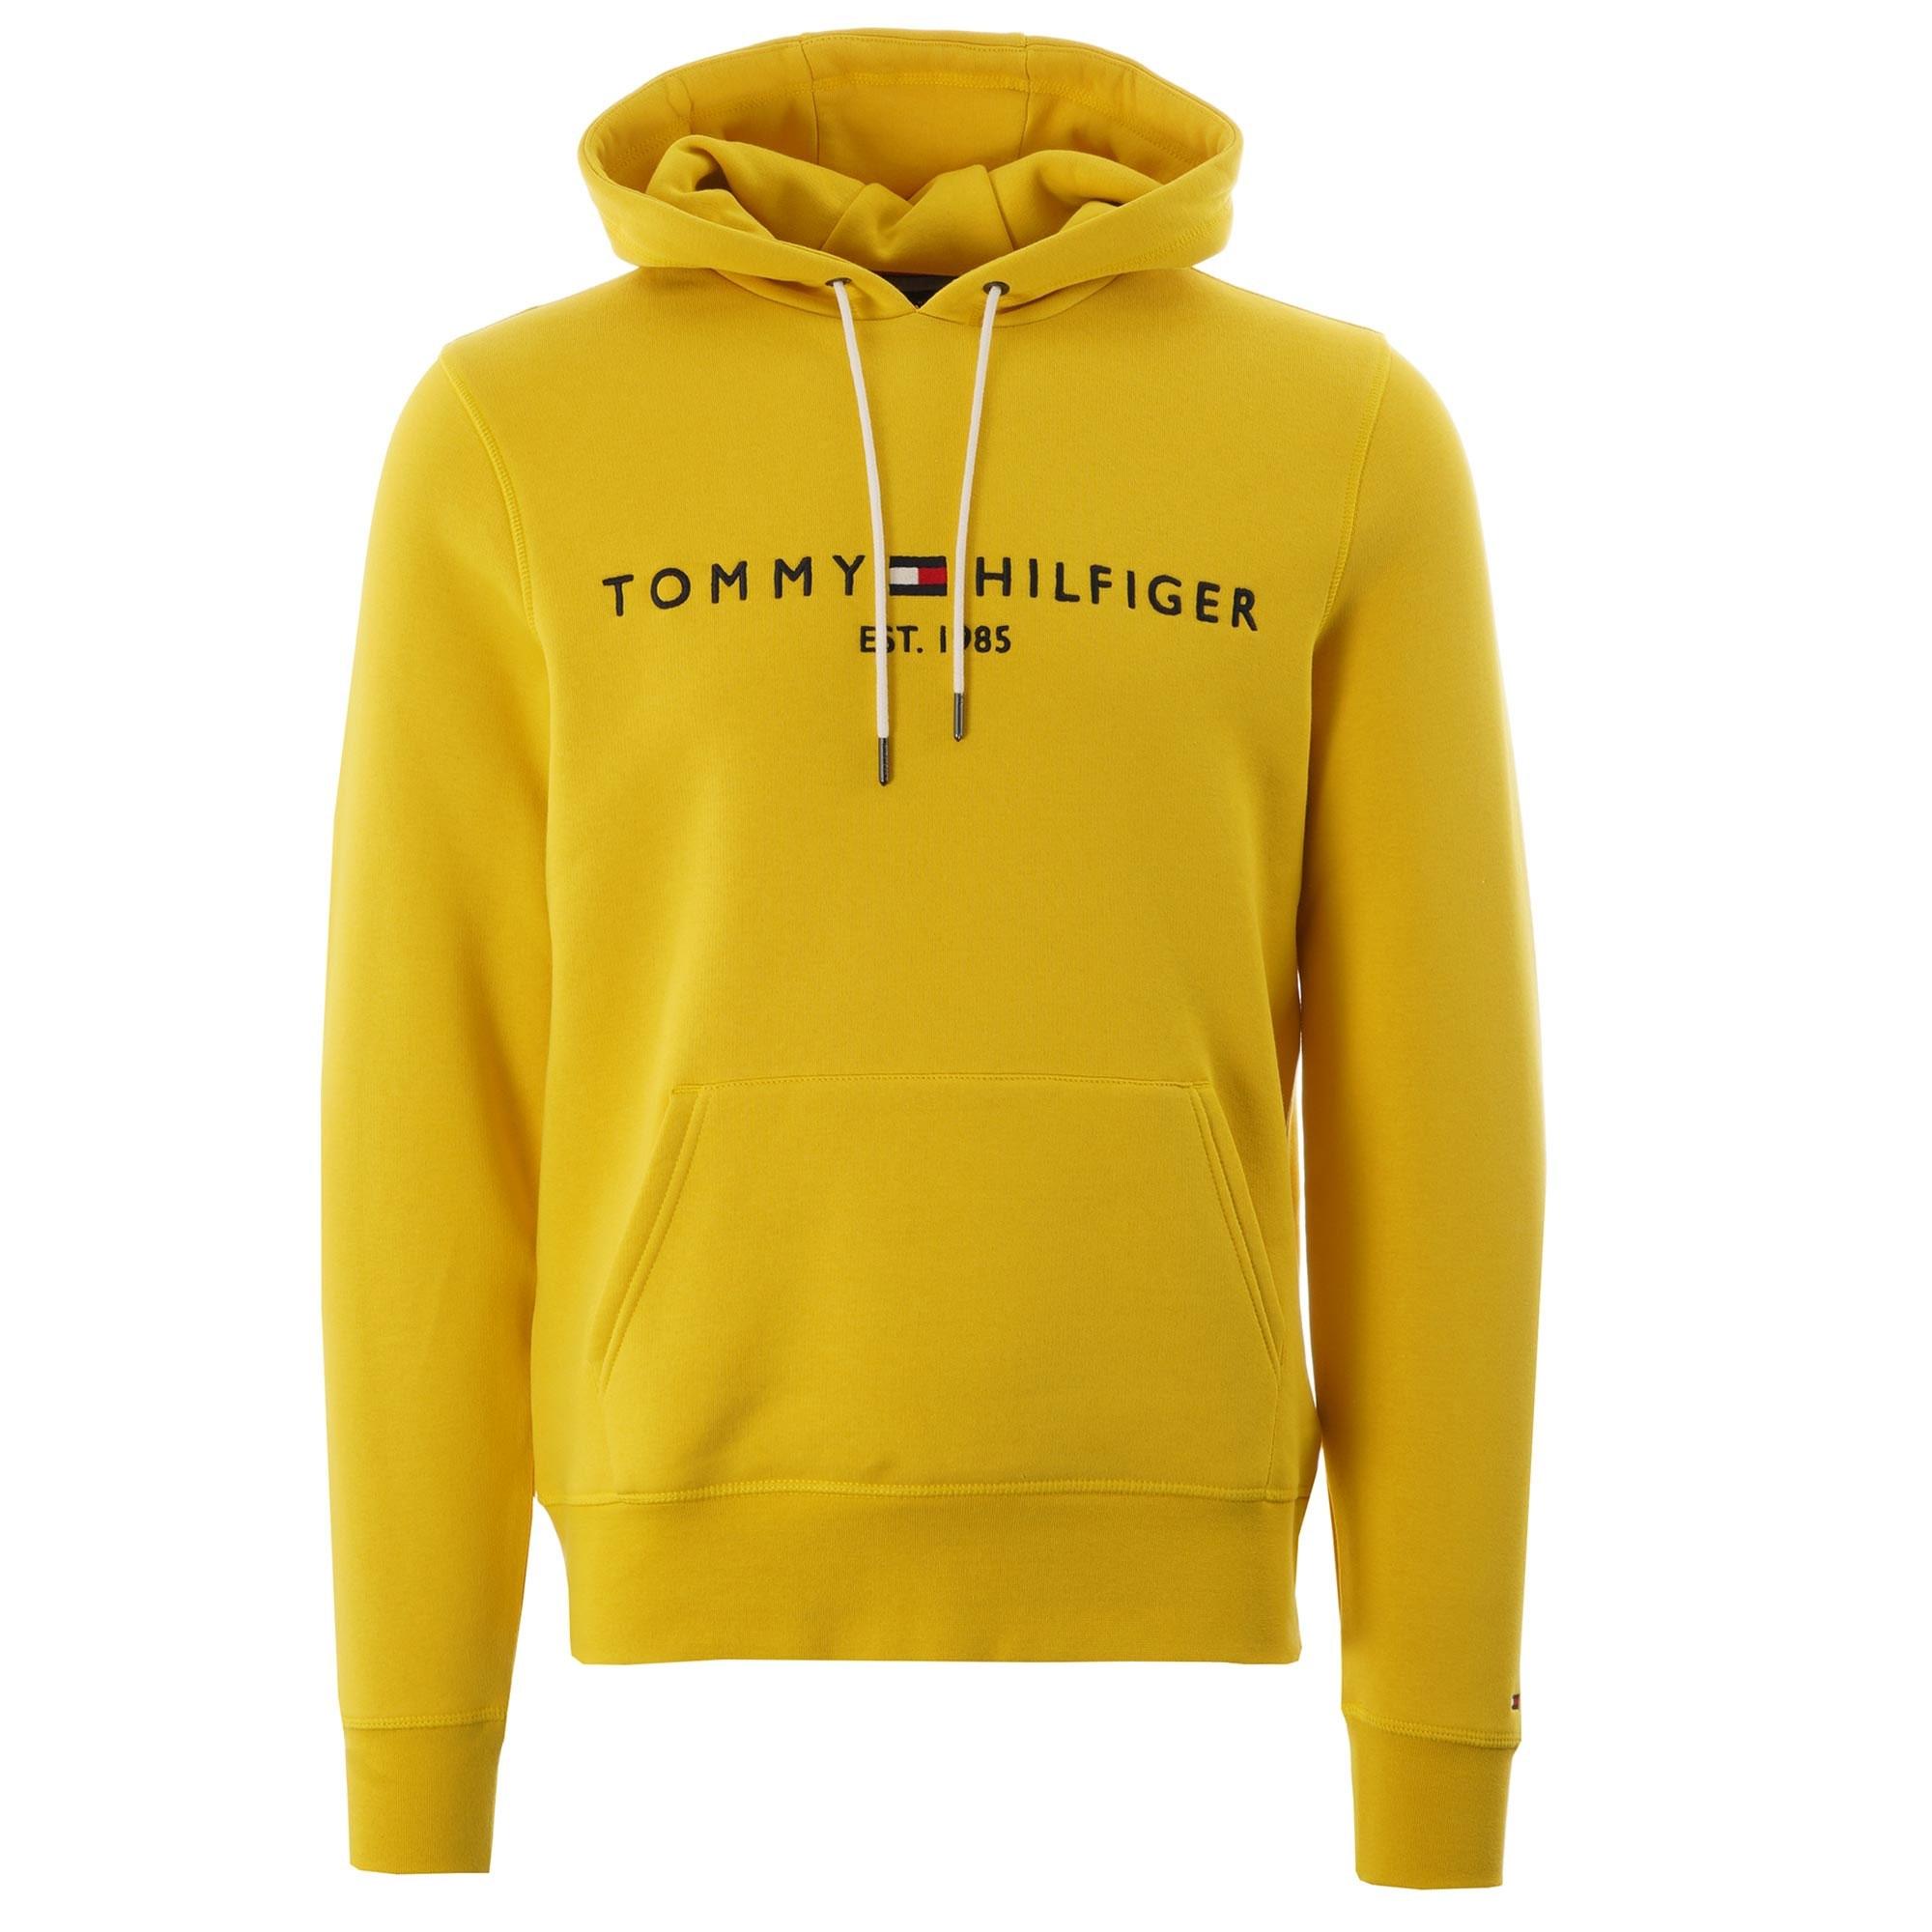 Tommy Hilfiger Logo Overhead Hoodie in Yellow for Men - Save 48% - Lyst